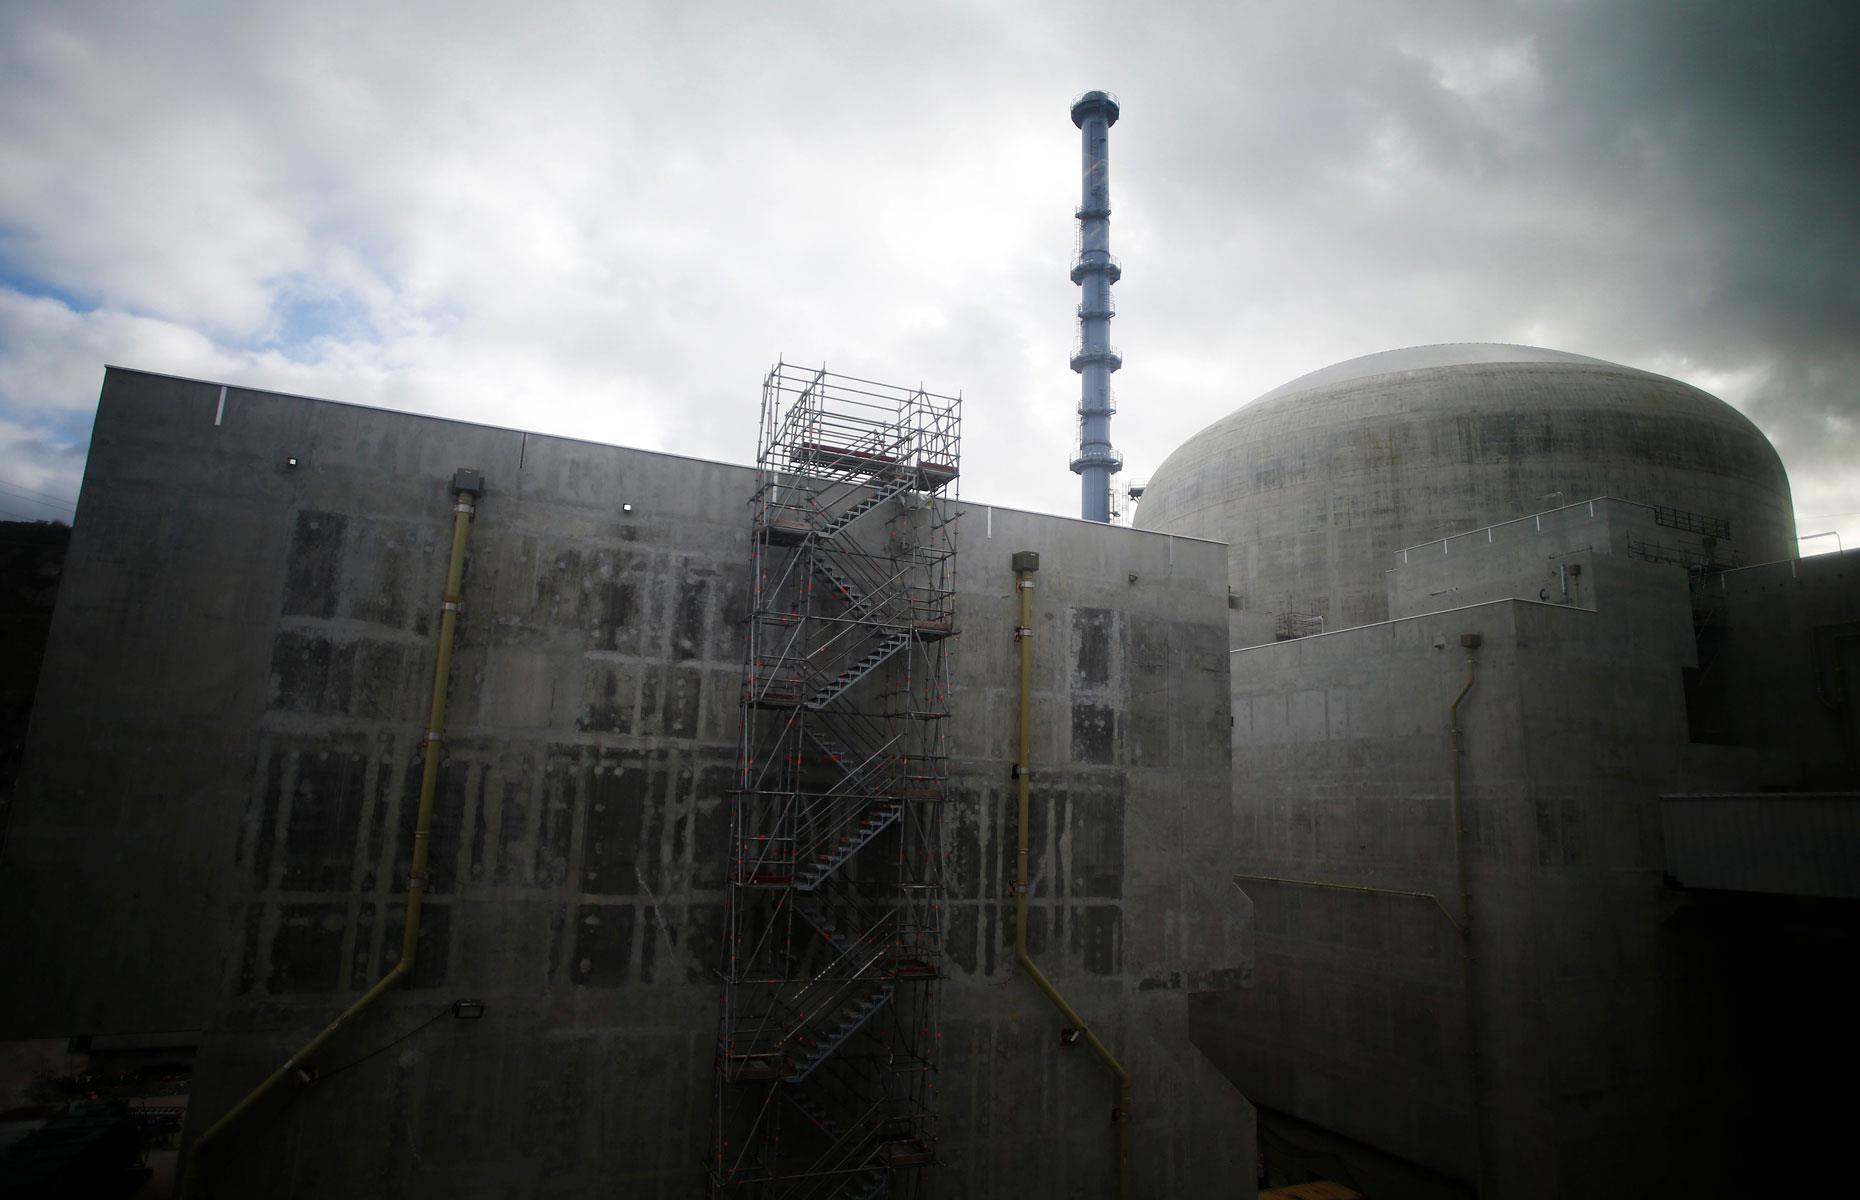 Flamanville 3 nuclear reactor, France: faults need fixing